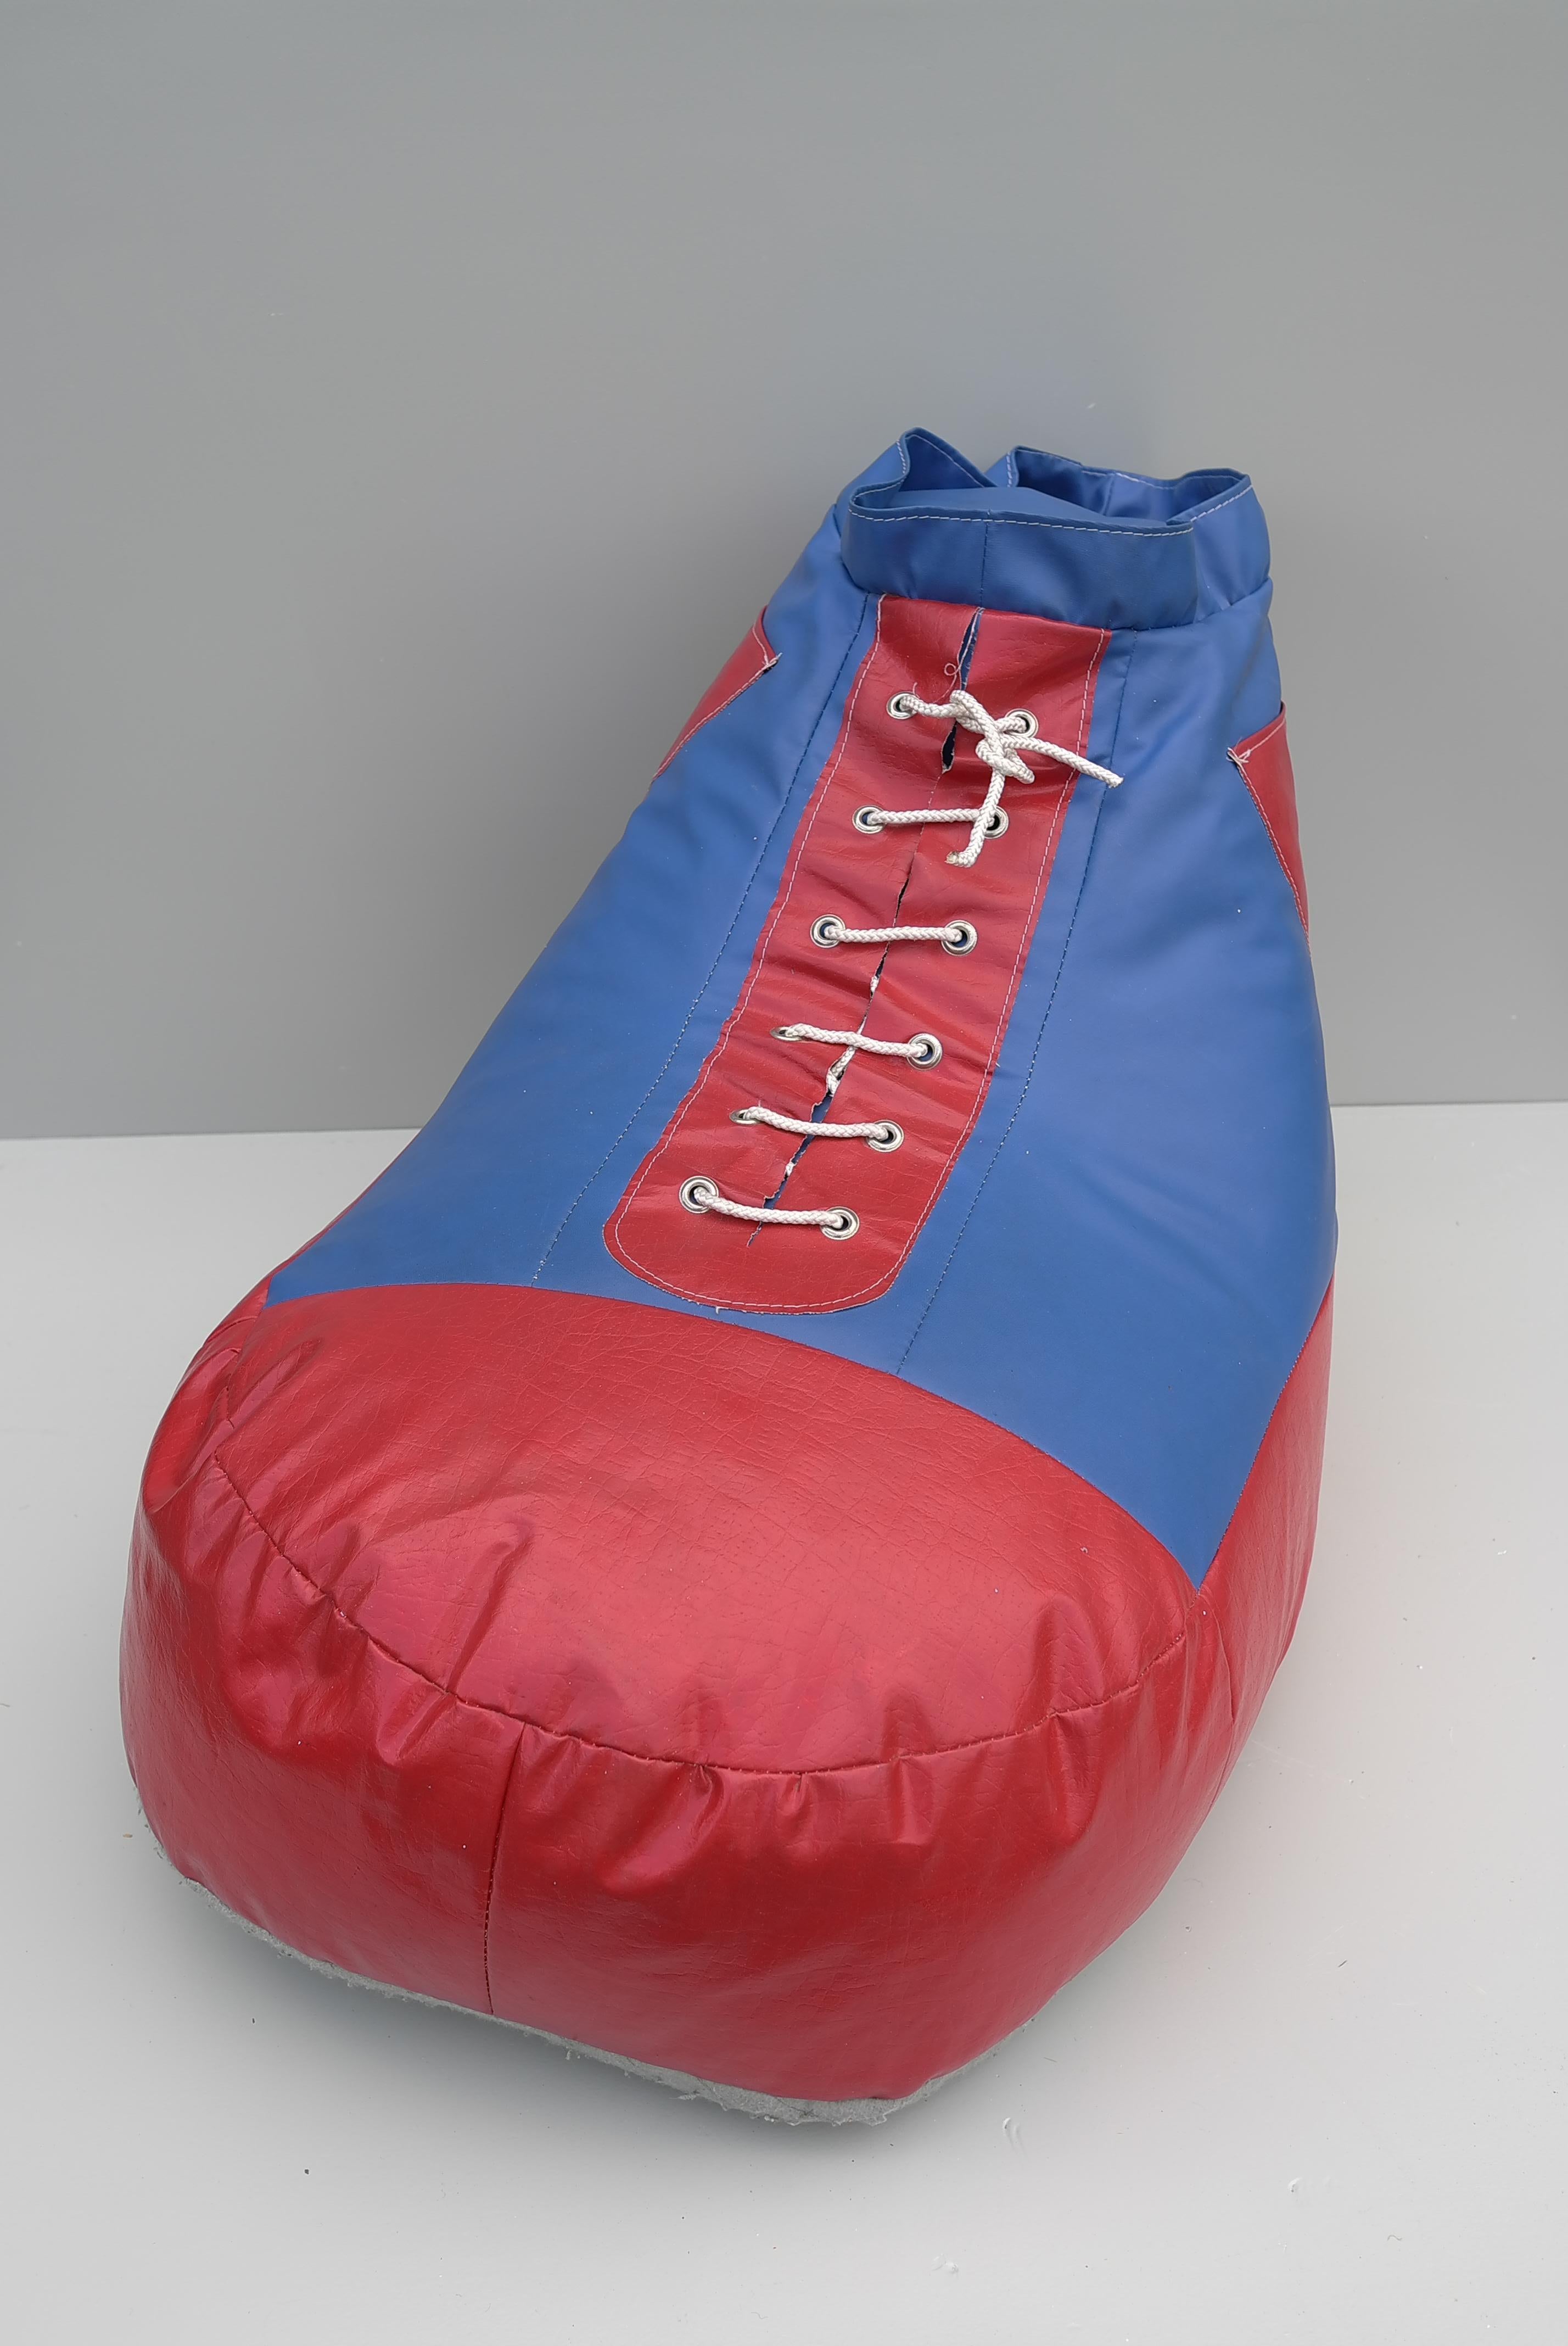 Boxing Shoe Mid-Century Pouf, Ottoman, 1970s, Switzerland

With Large Pockets on each side, perfect sit for a playroom or Pop art interior.

Depth 90cm, Width 55cm, Height 55cm, seat height 25cm